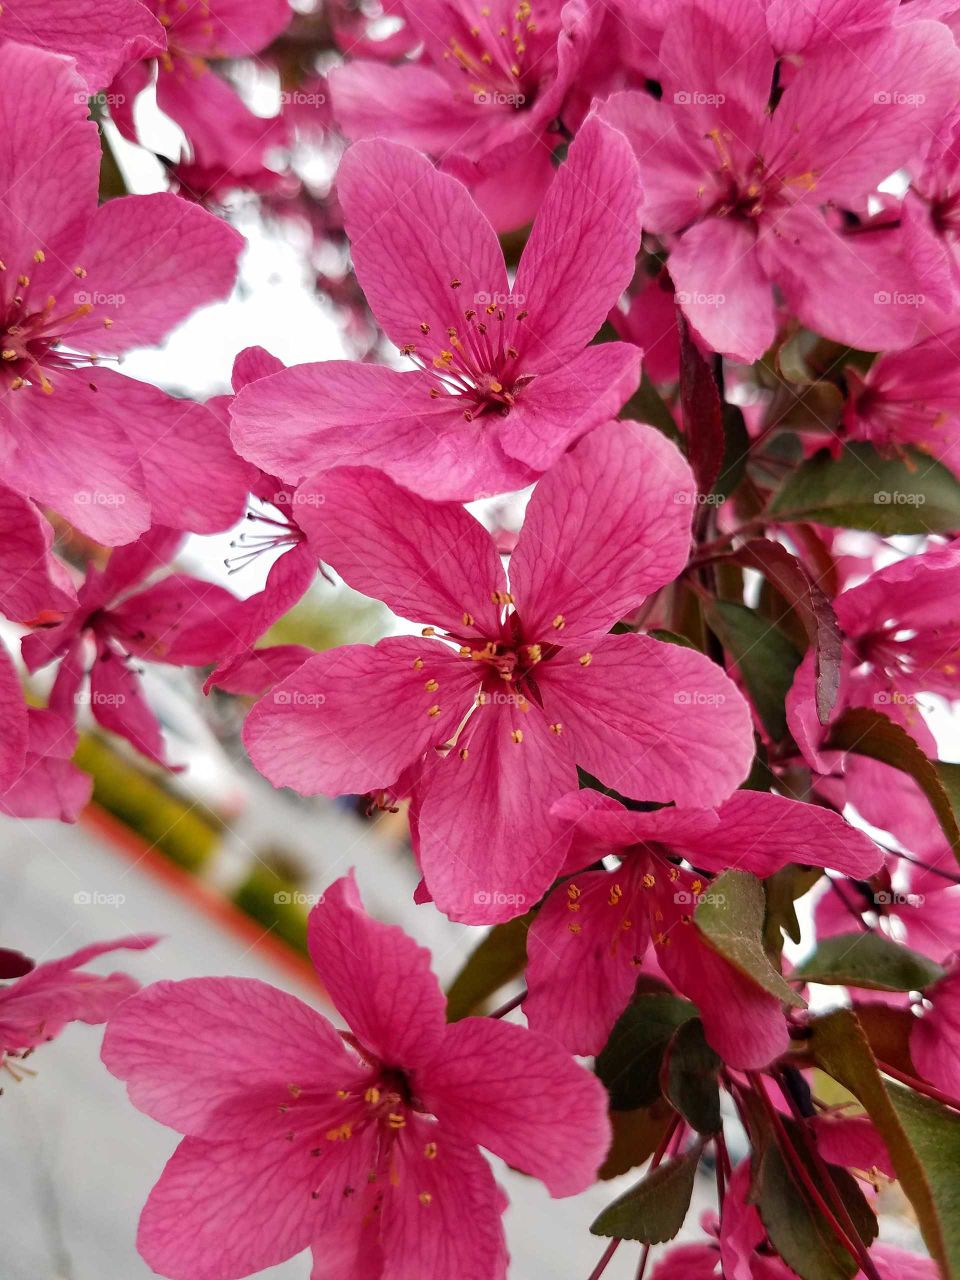 Pink blossoms on a tree branch on a cloudy spring day